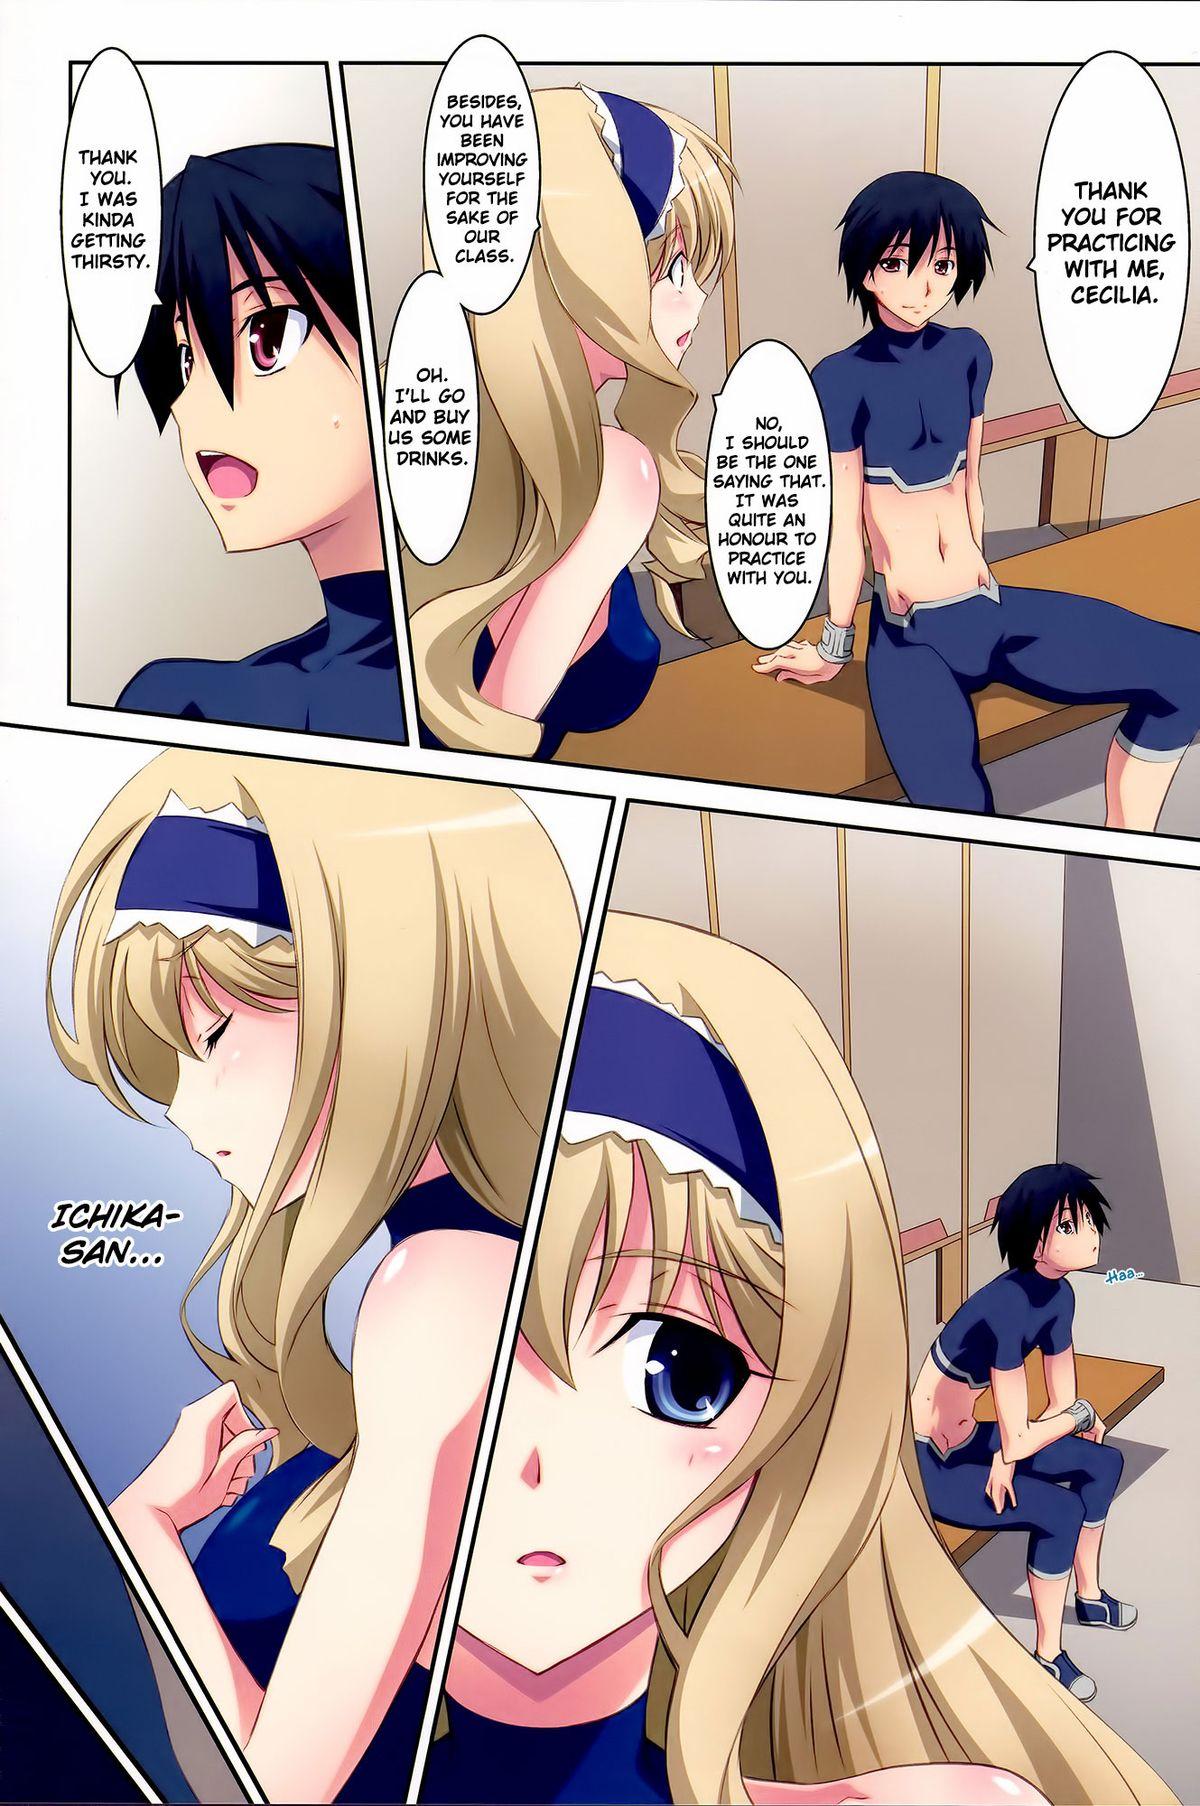 Cumming Cecilia Style - Infinite stratos Pissing - Page 4